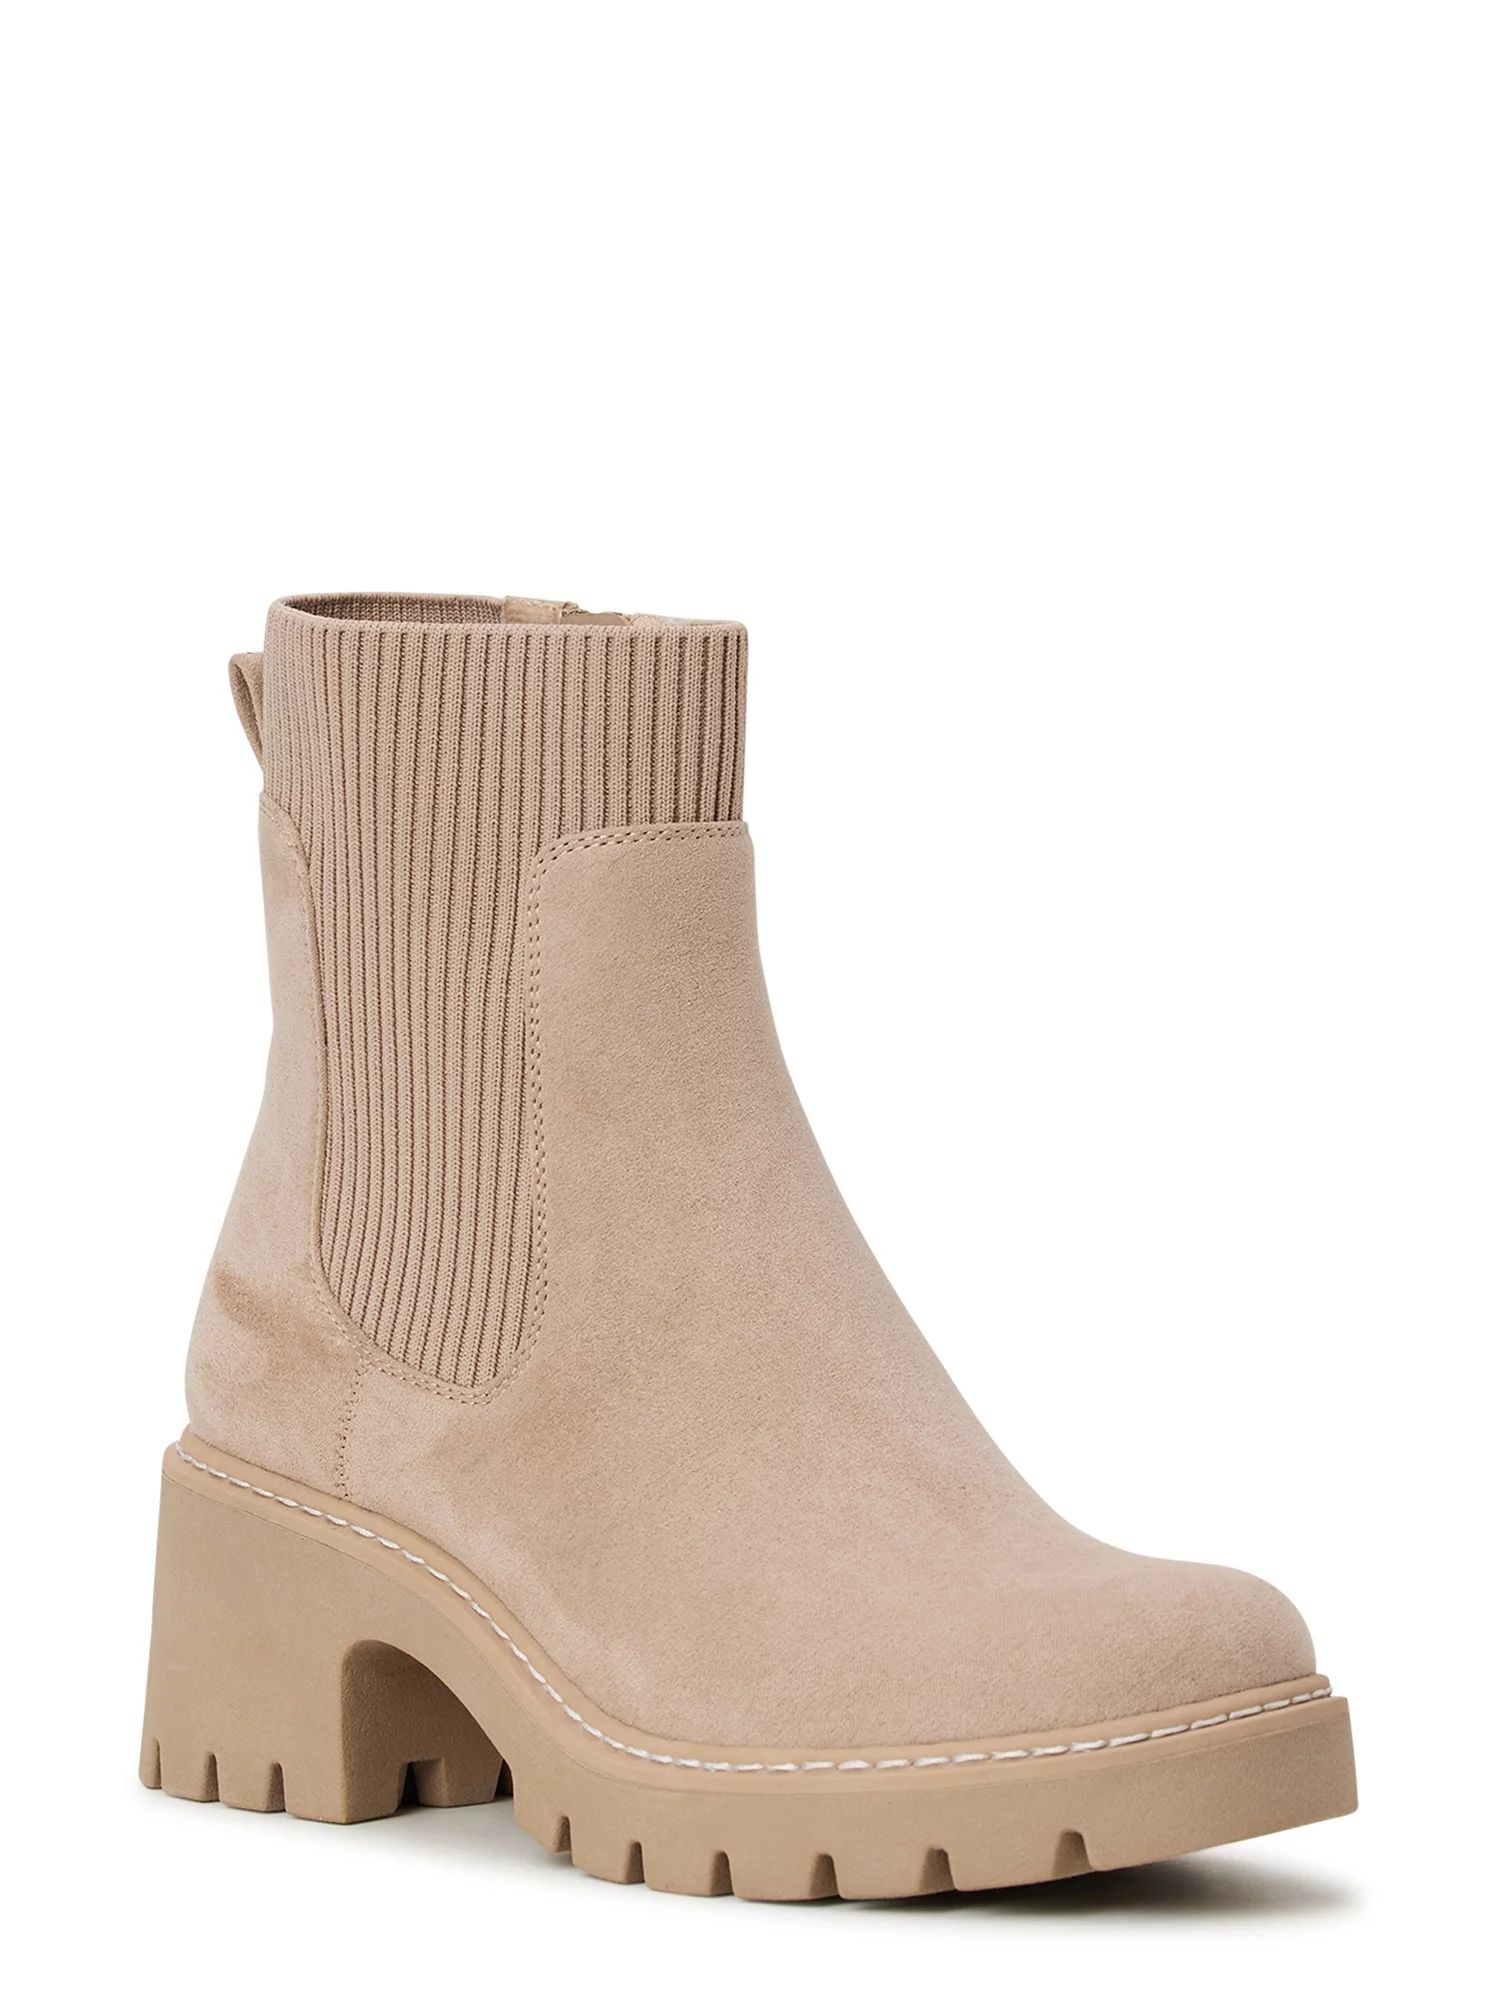 No Boundaries Women's Chelsea Boots with Knit Panel | Walmart (US)